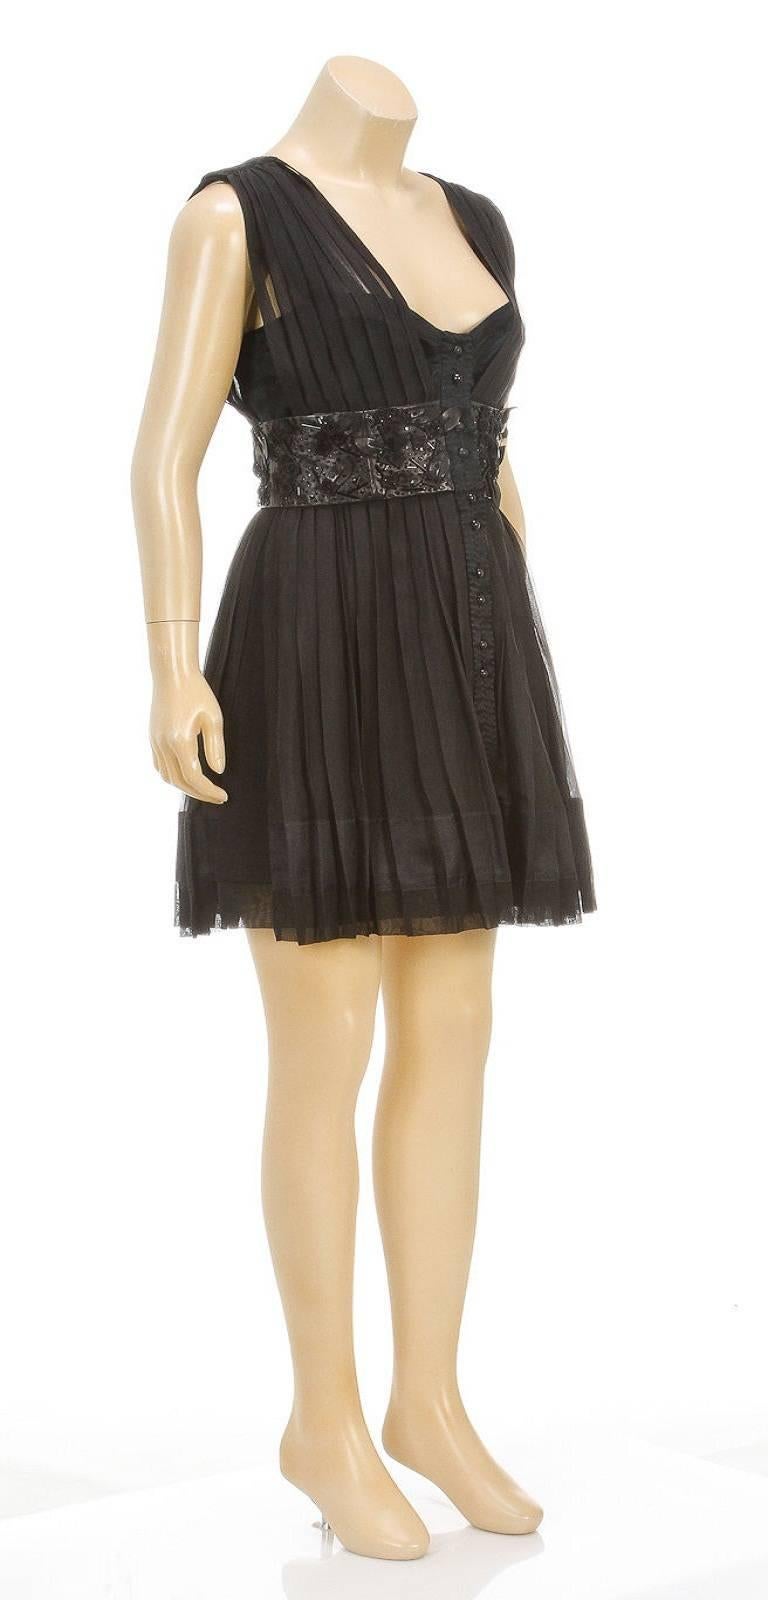 Louis Vuitton Black Sleeveless Floral Leather Waist Button Dress (Size 38) In Good Condition For Sale In Corona Del Mar, CA